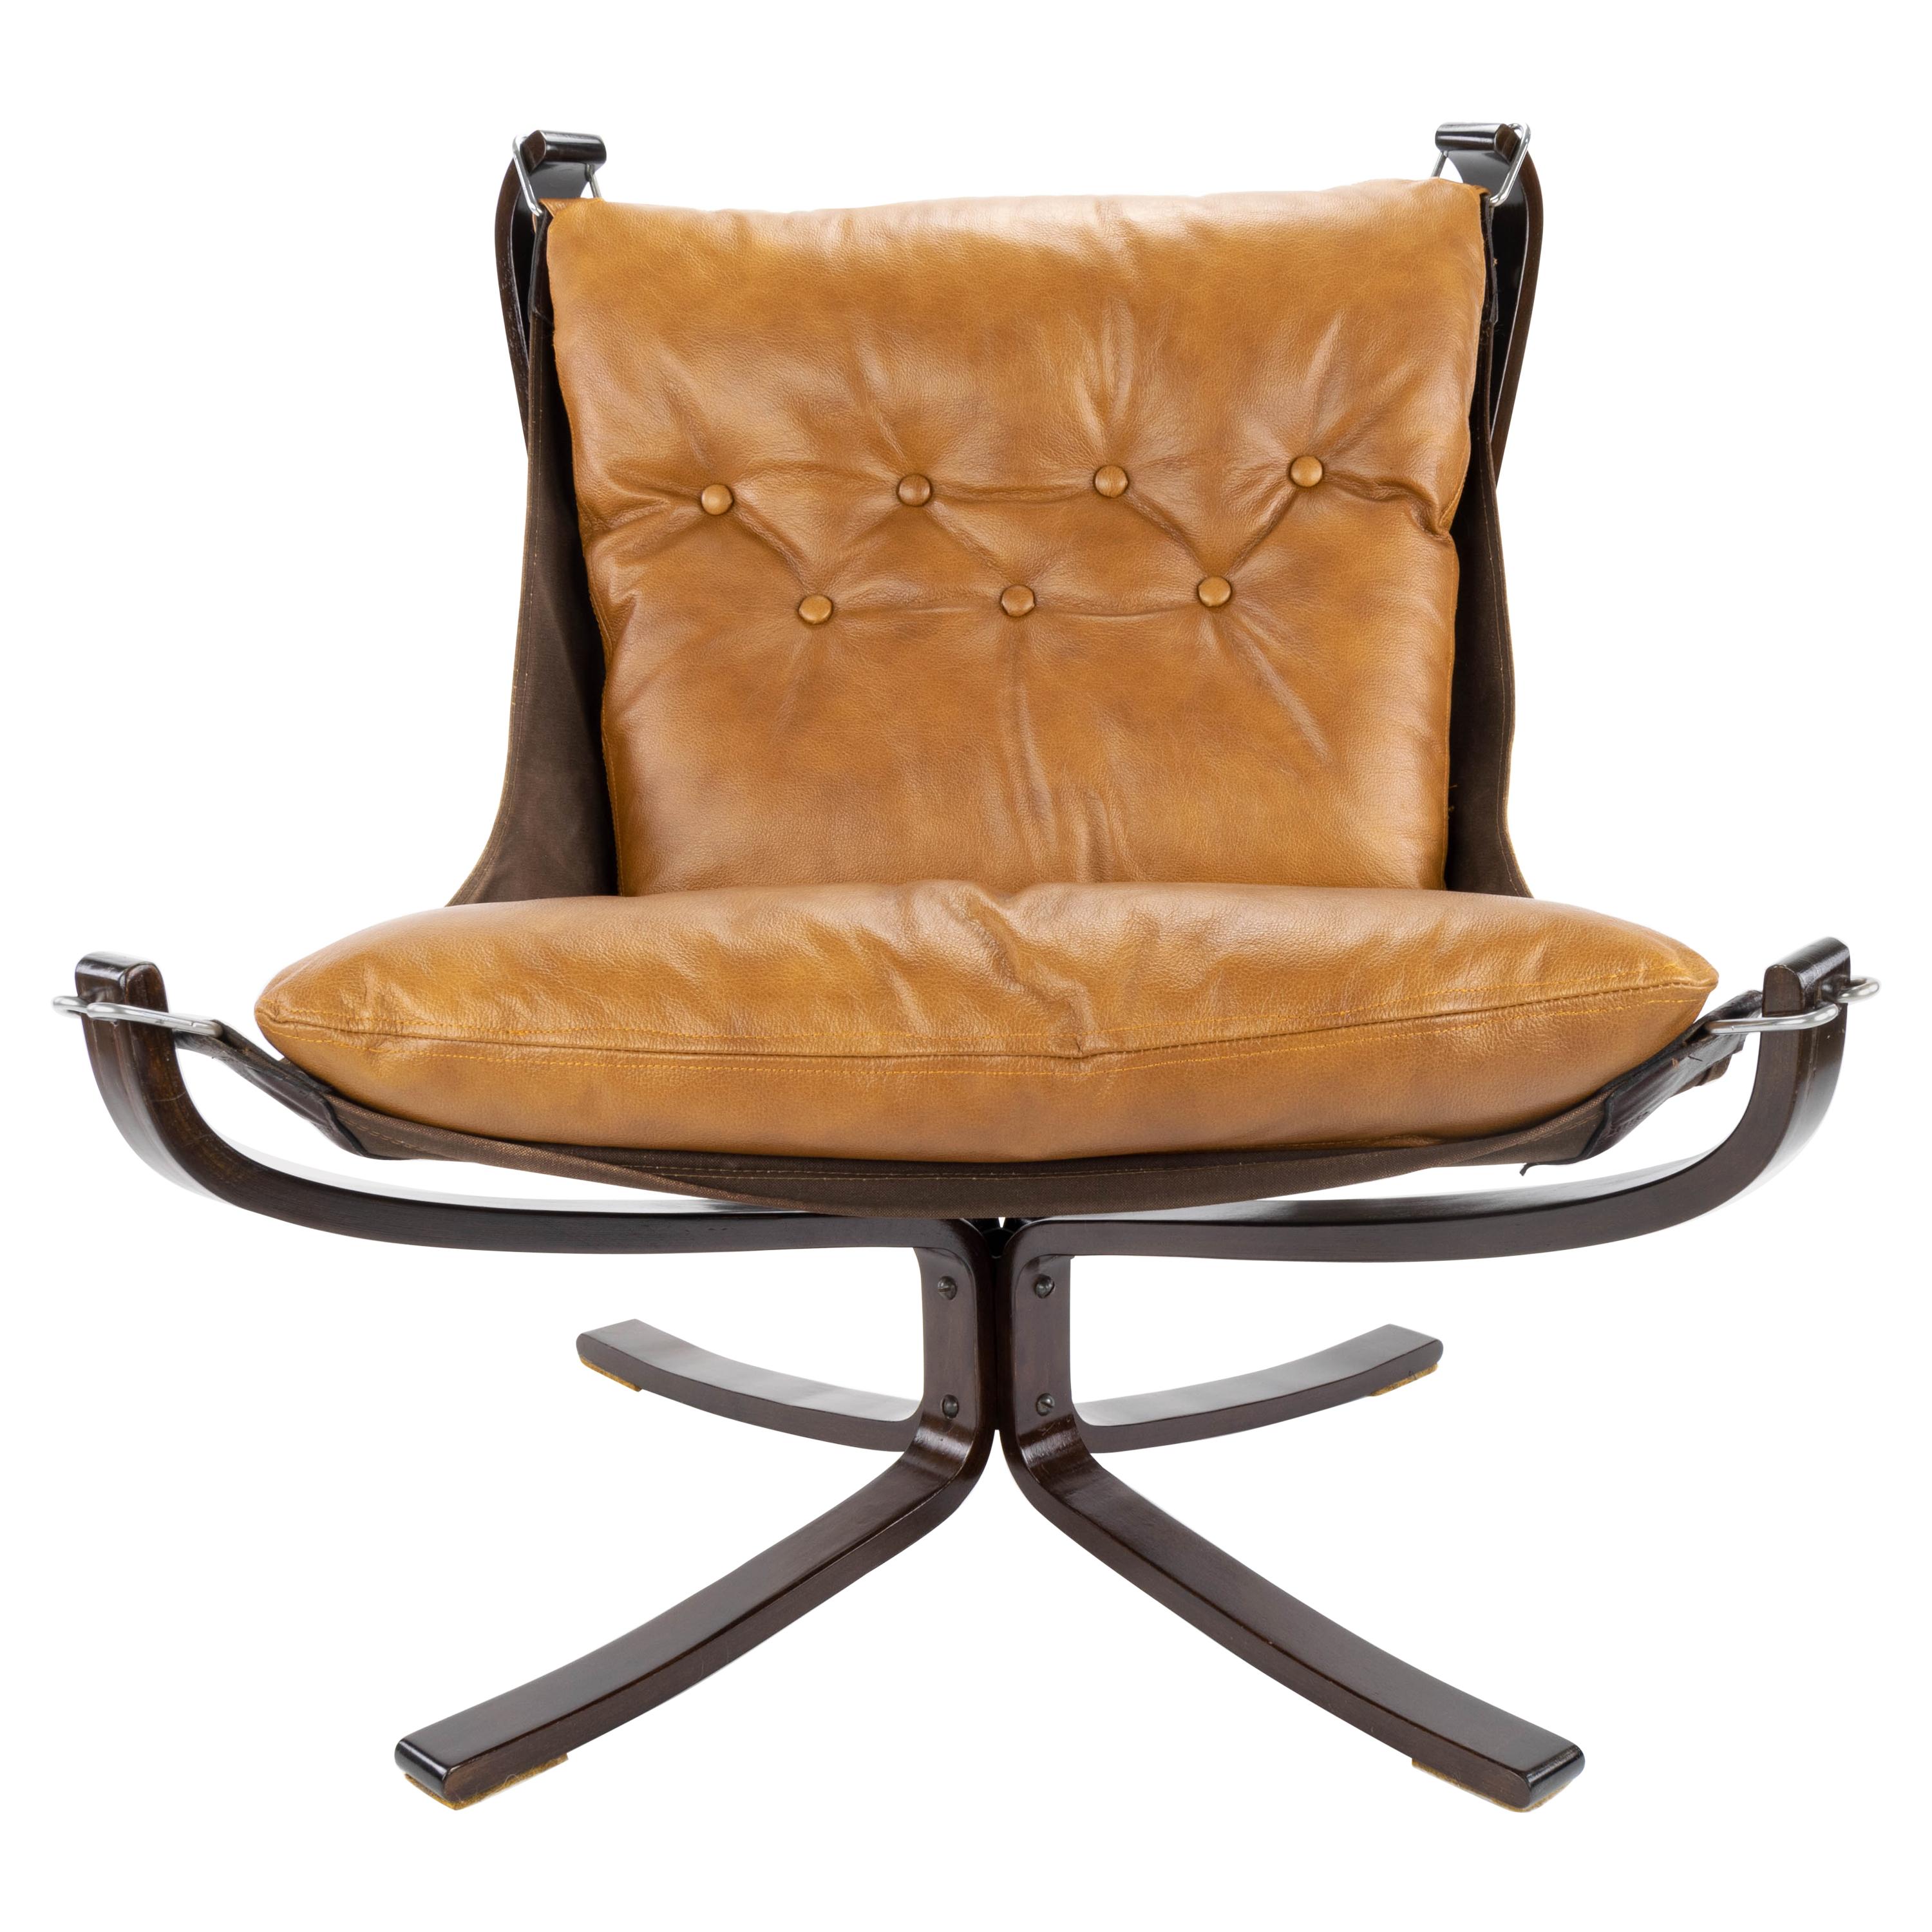 Cognac Leather Falcon Longe Chair by Sigurd Ressell for Vatne Möbler Norway 1970